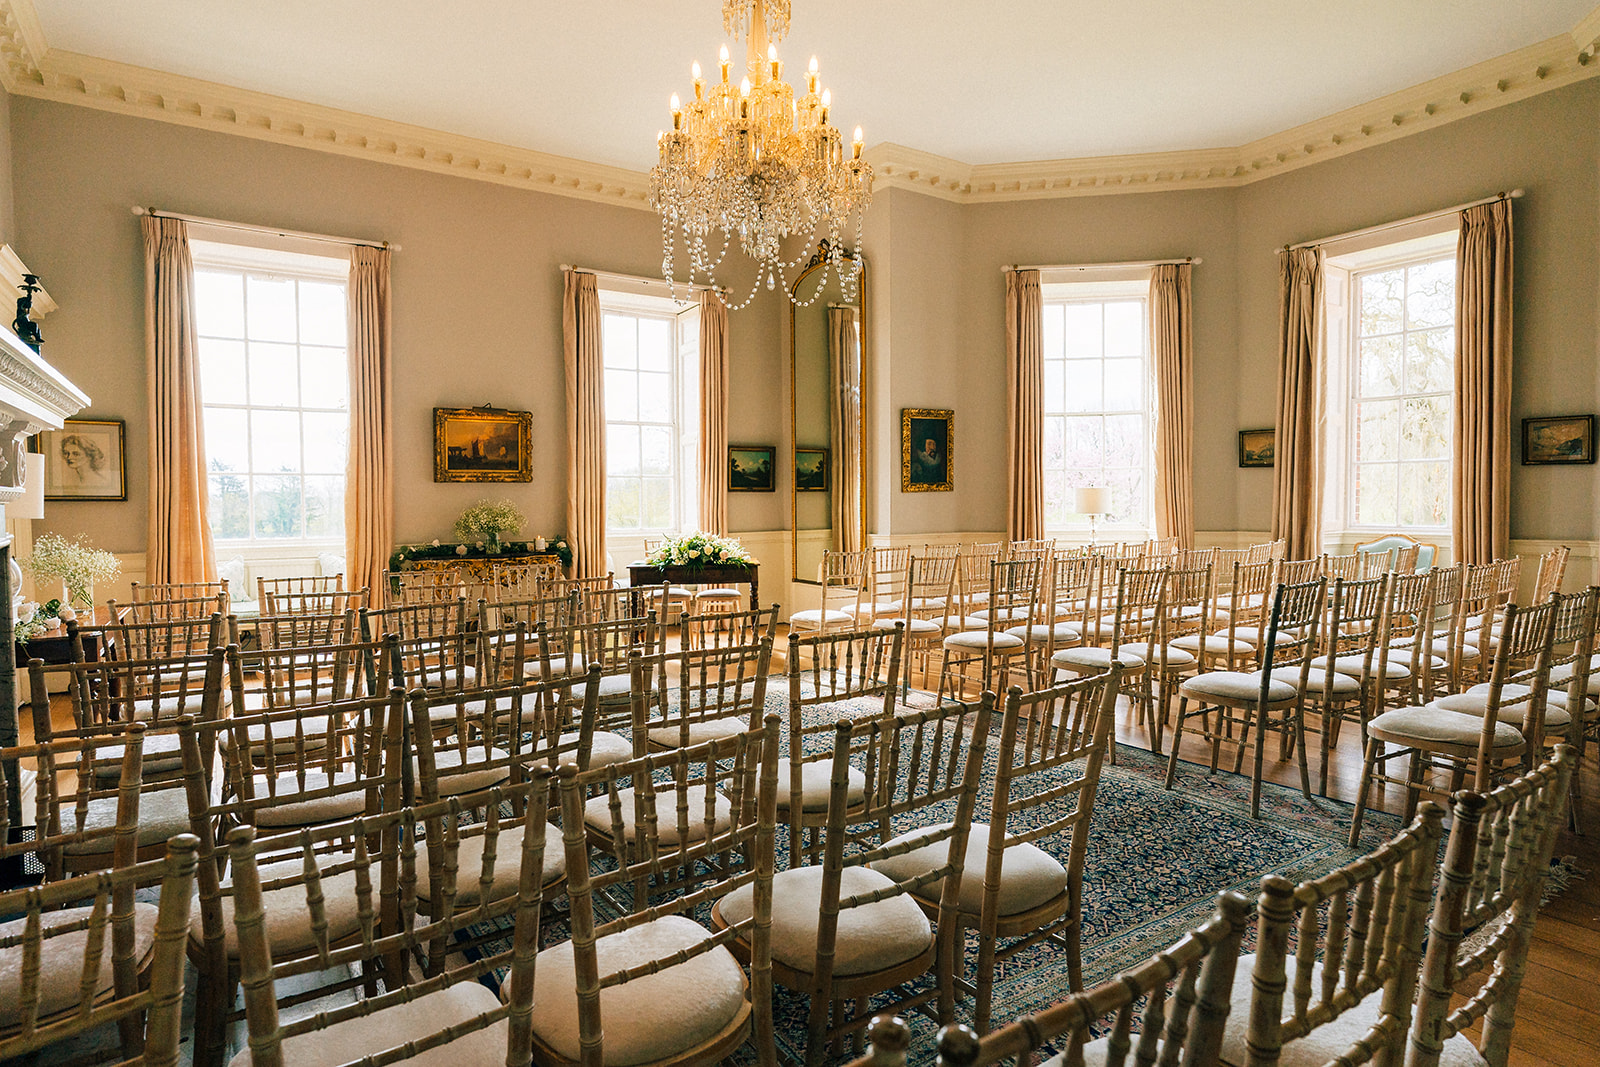 The ceremony room at Norwood Park in Southwell Nottingham